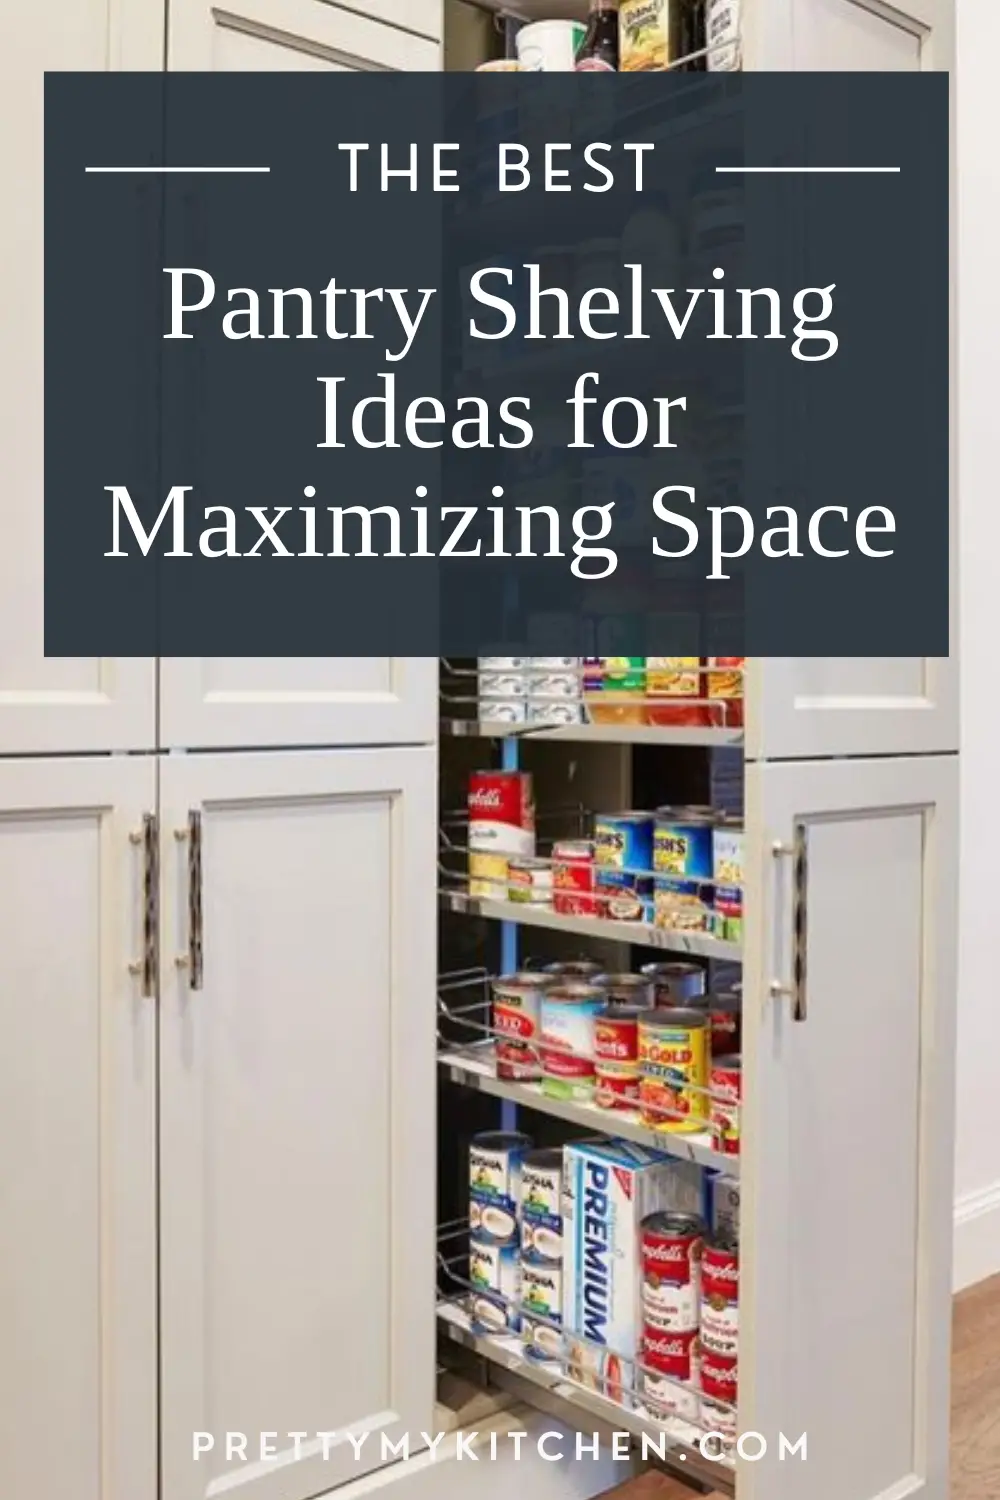 The best pantry shelving ideas for pantry organization and food storage!